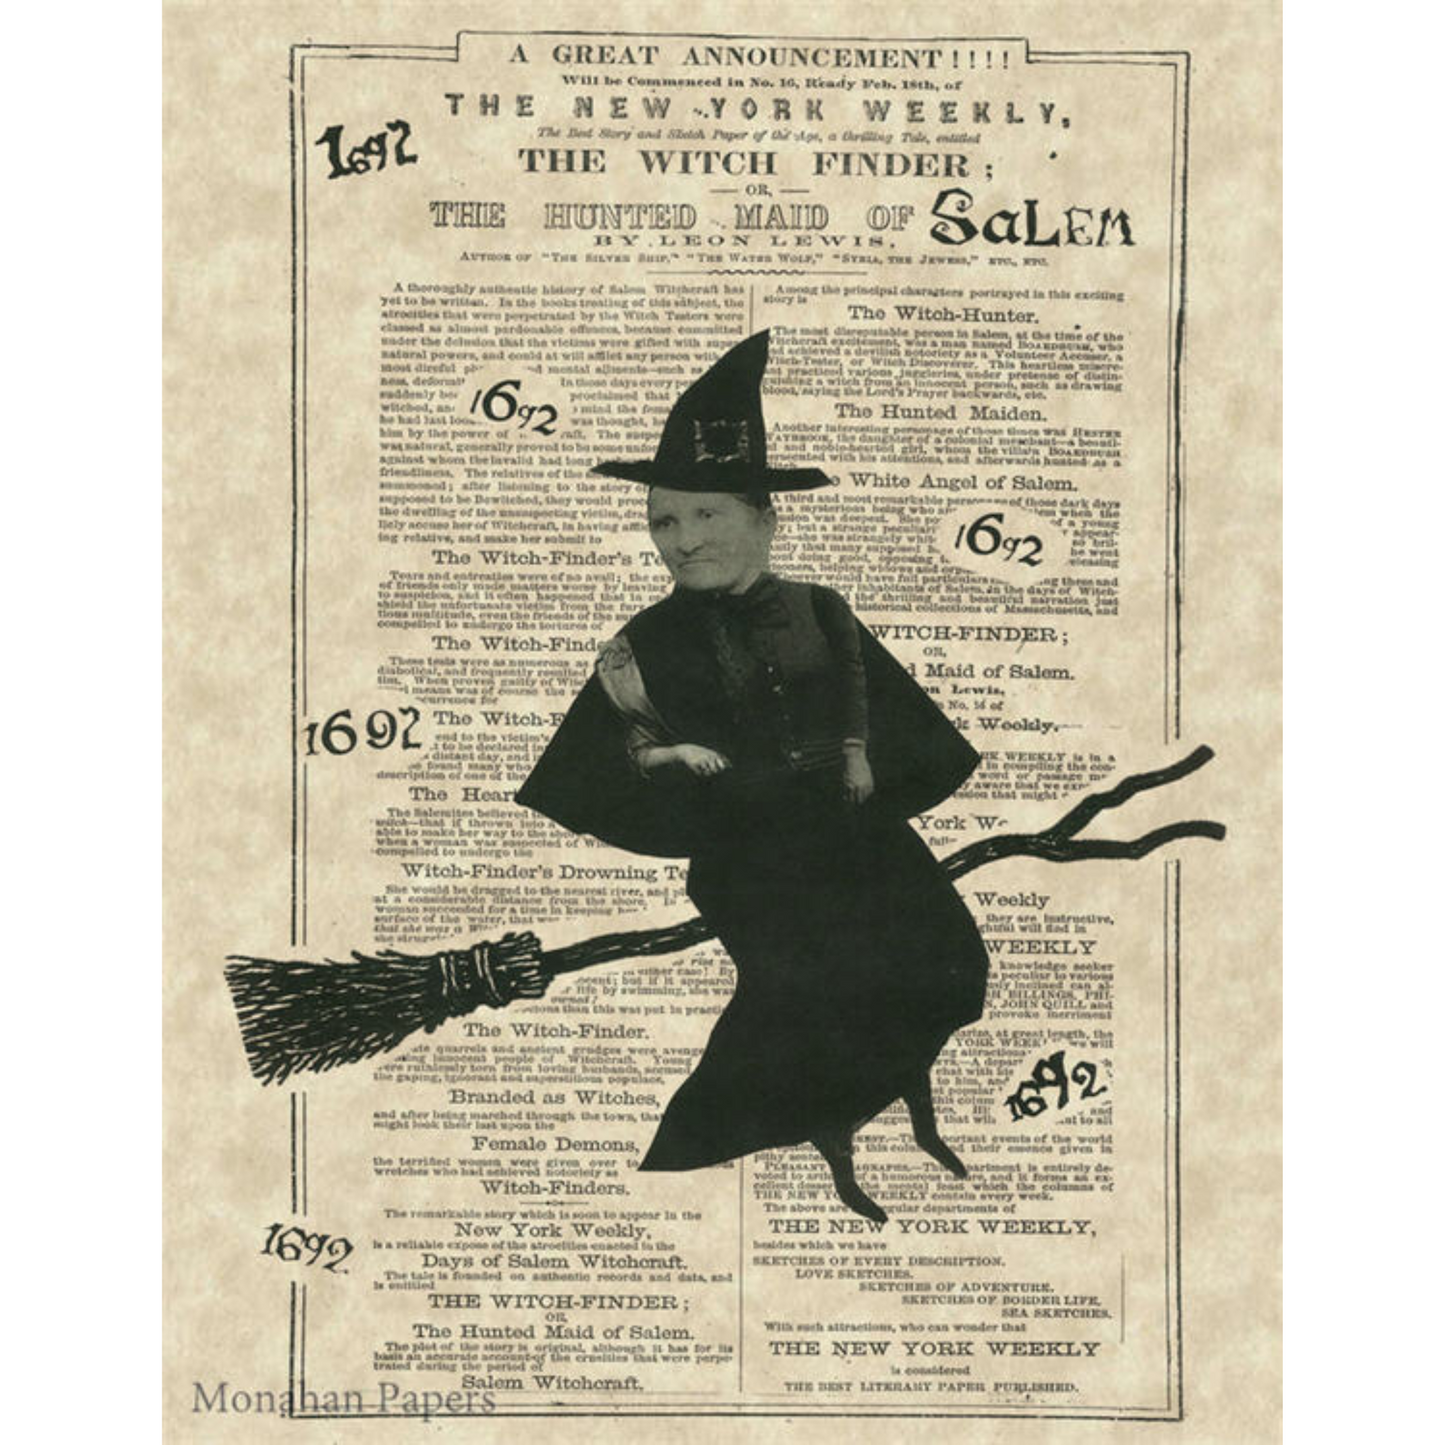 "The Hunted Witch of Salem" decoupage paper by Monahan Papers available at Milton's Daughter